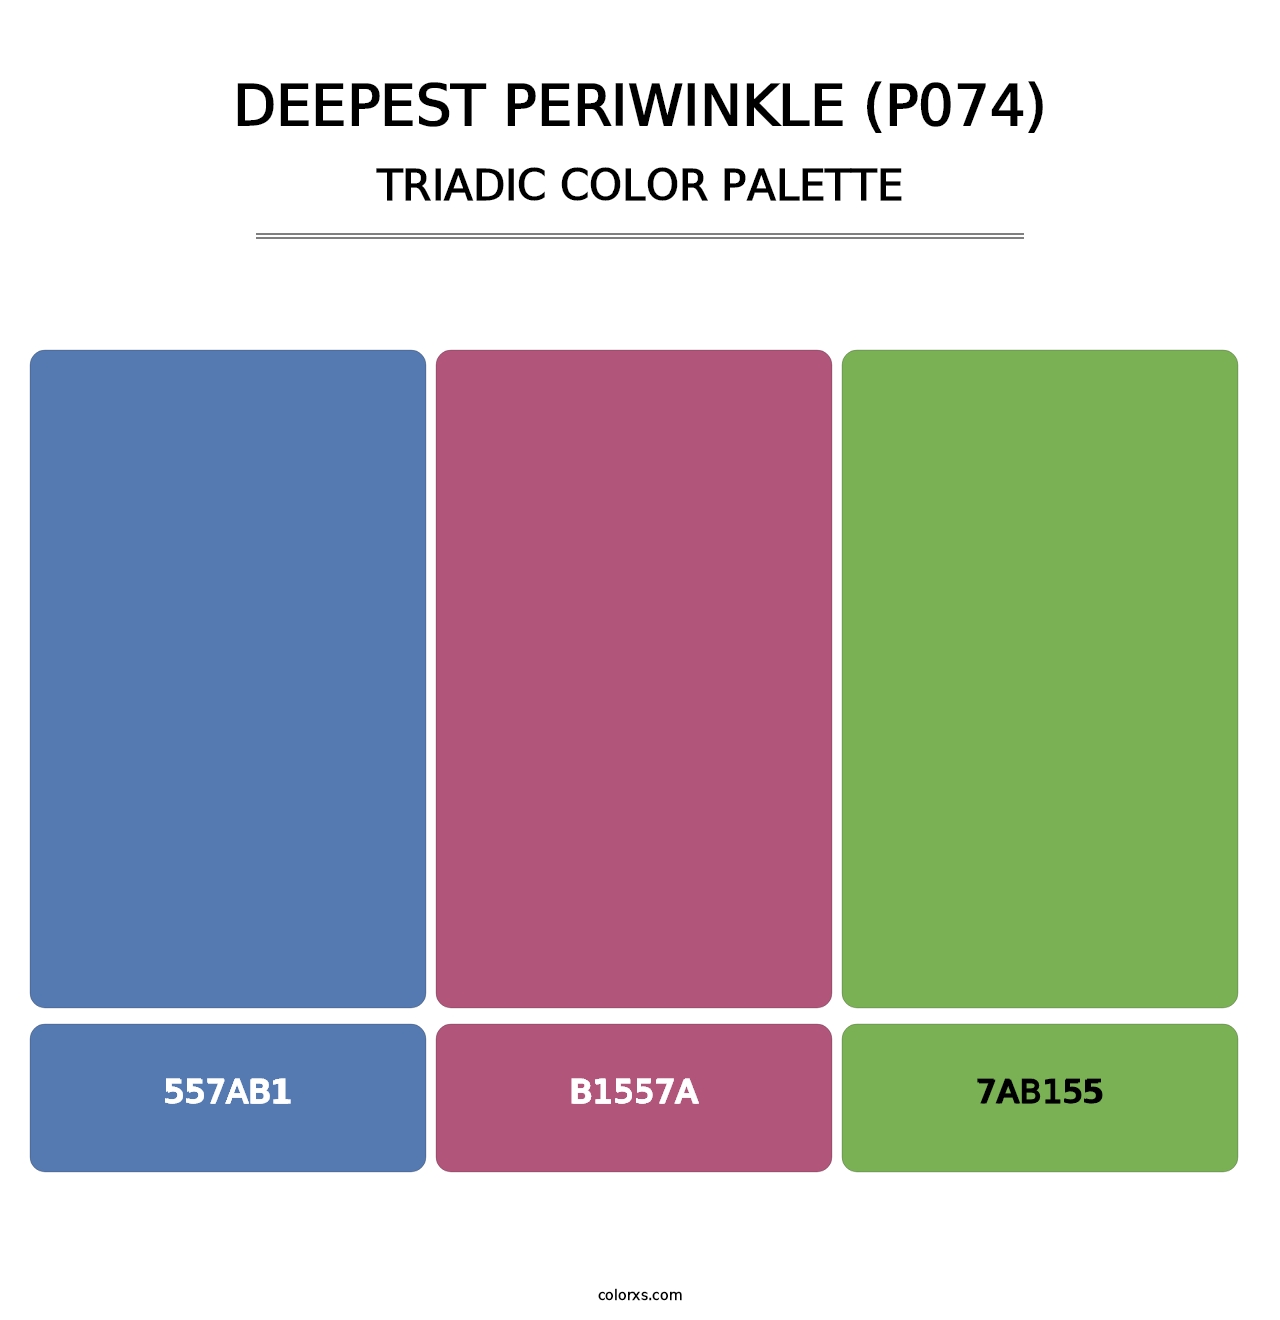 Deepest Periwinkle (P074) - Triadic Color Palette